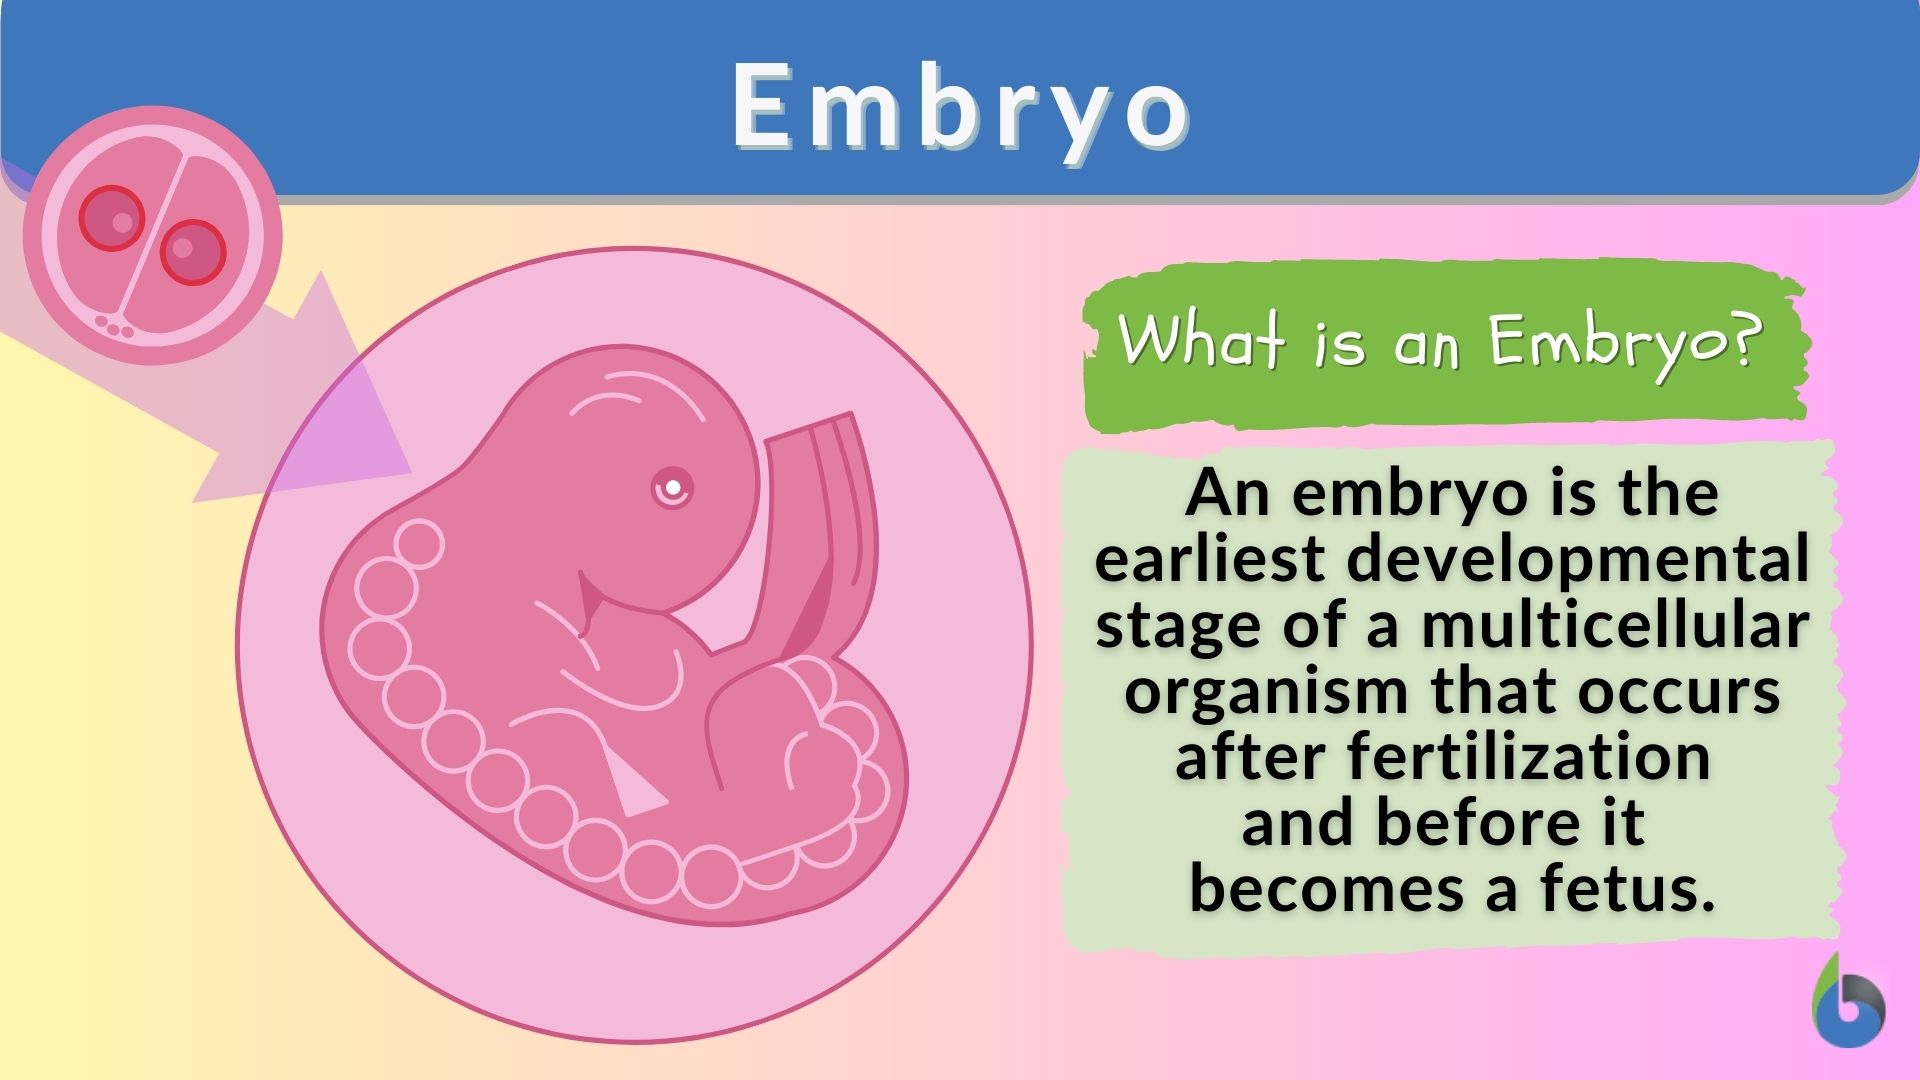 Embryo - Definition and Examples - Biology Online Dictionary